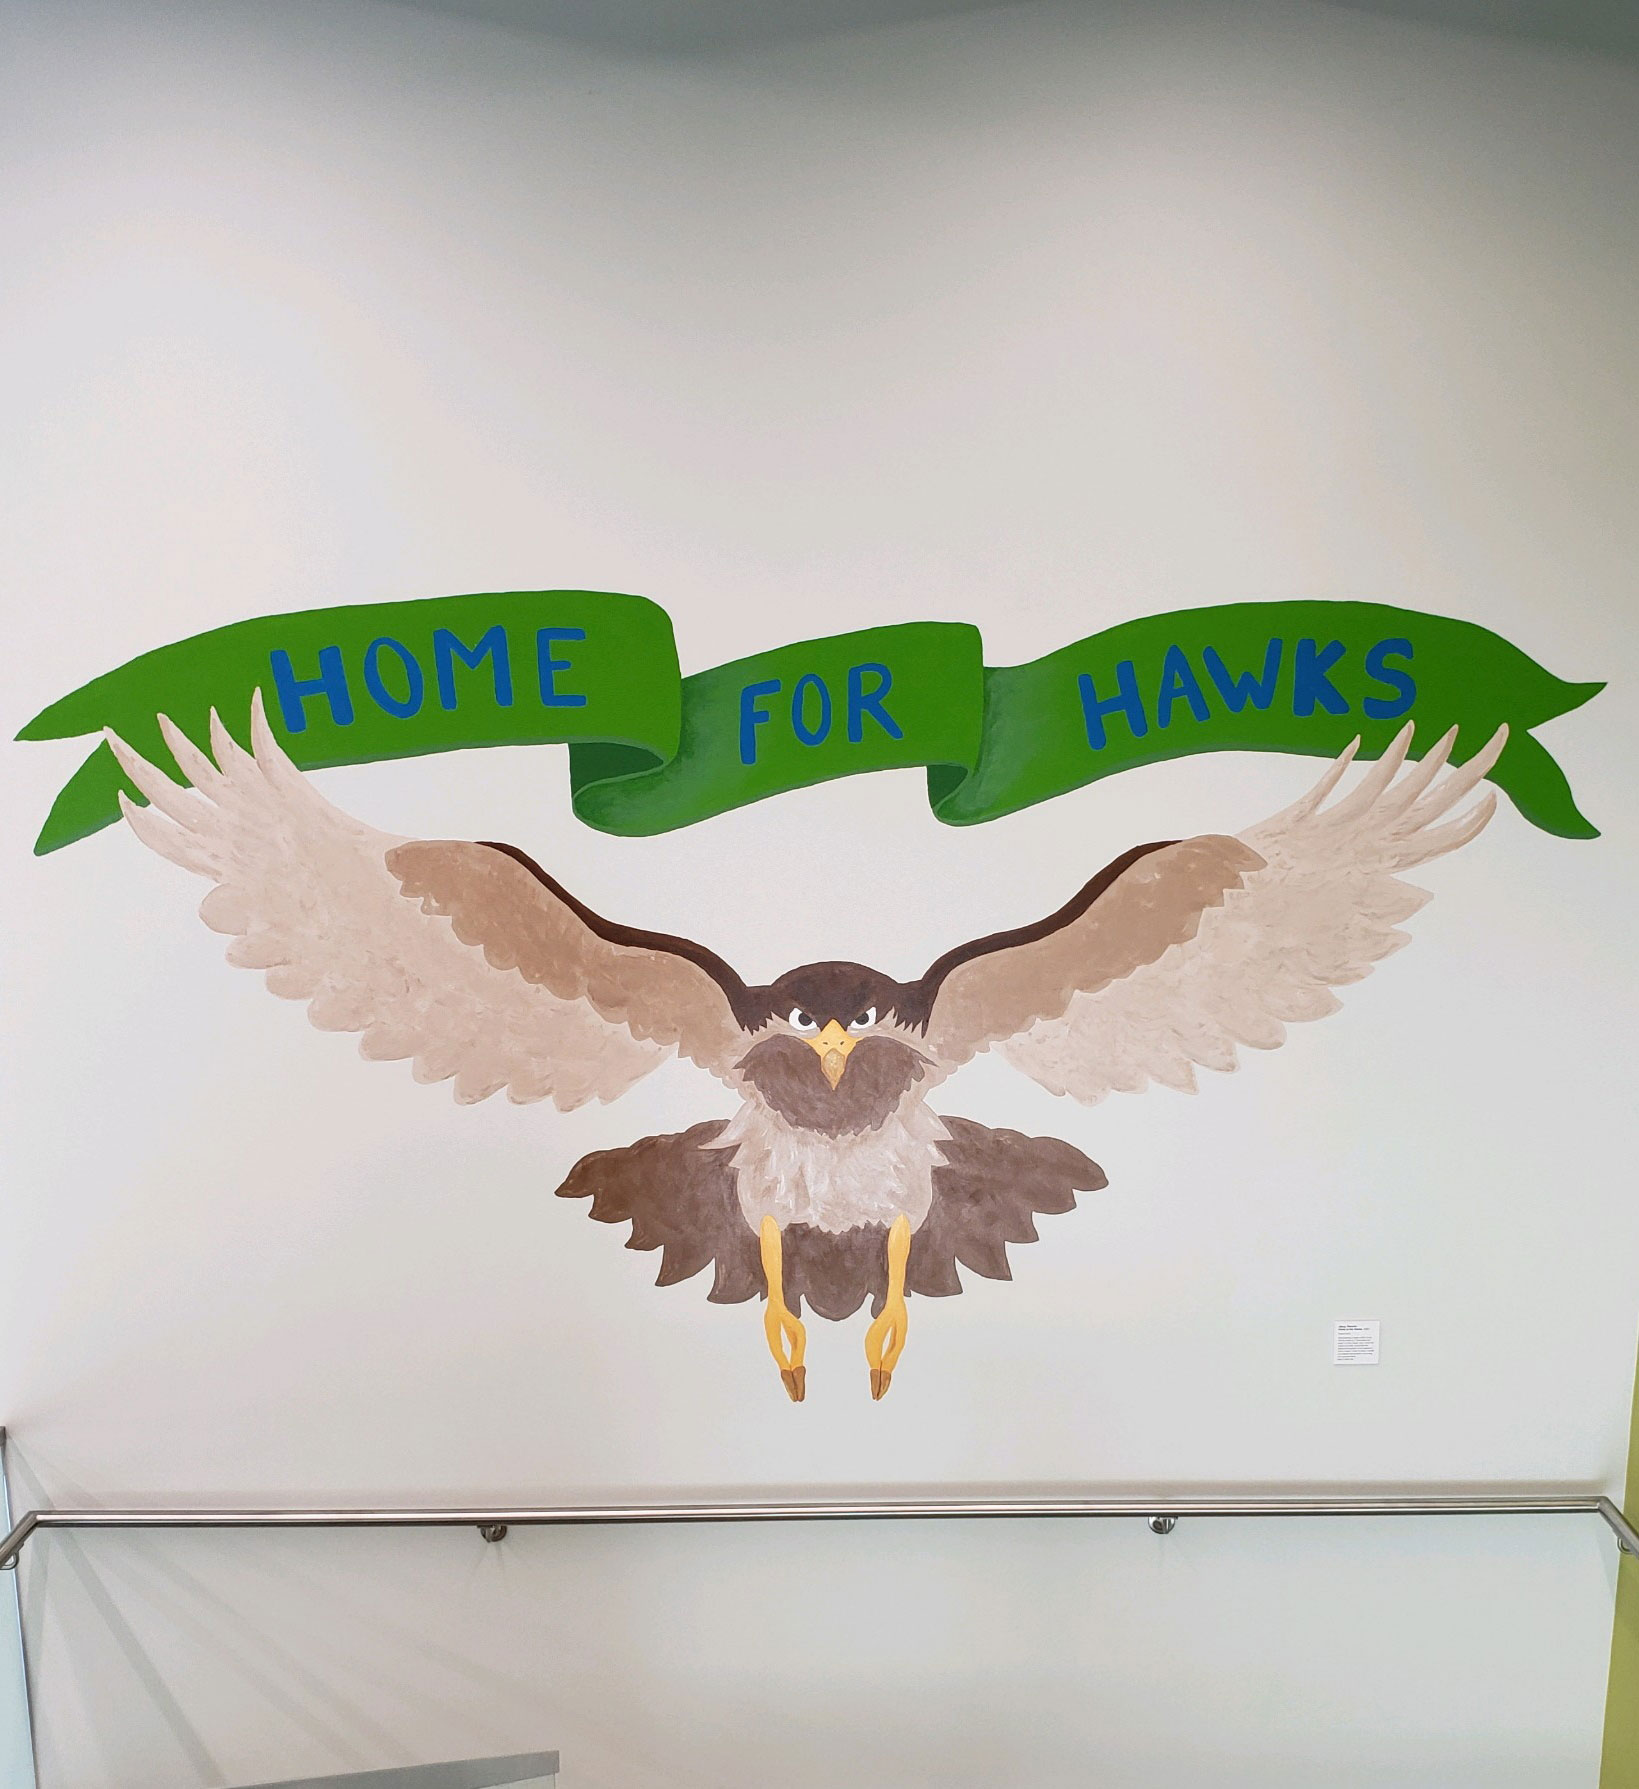 PHOTO: Image shows a hawk painted on a white wall with a green banner above the hawk saying "Home For Hawks." Photo courtesy of Matthew Perry.